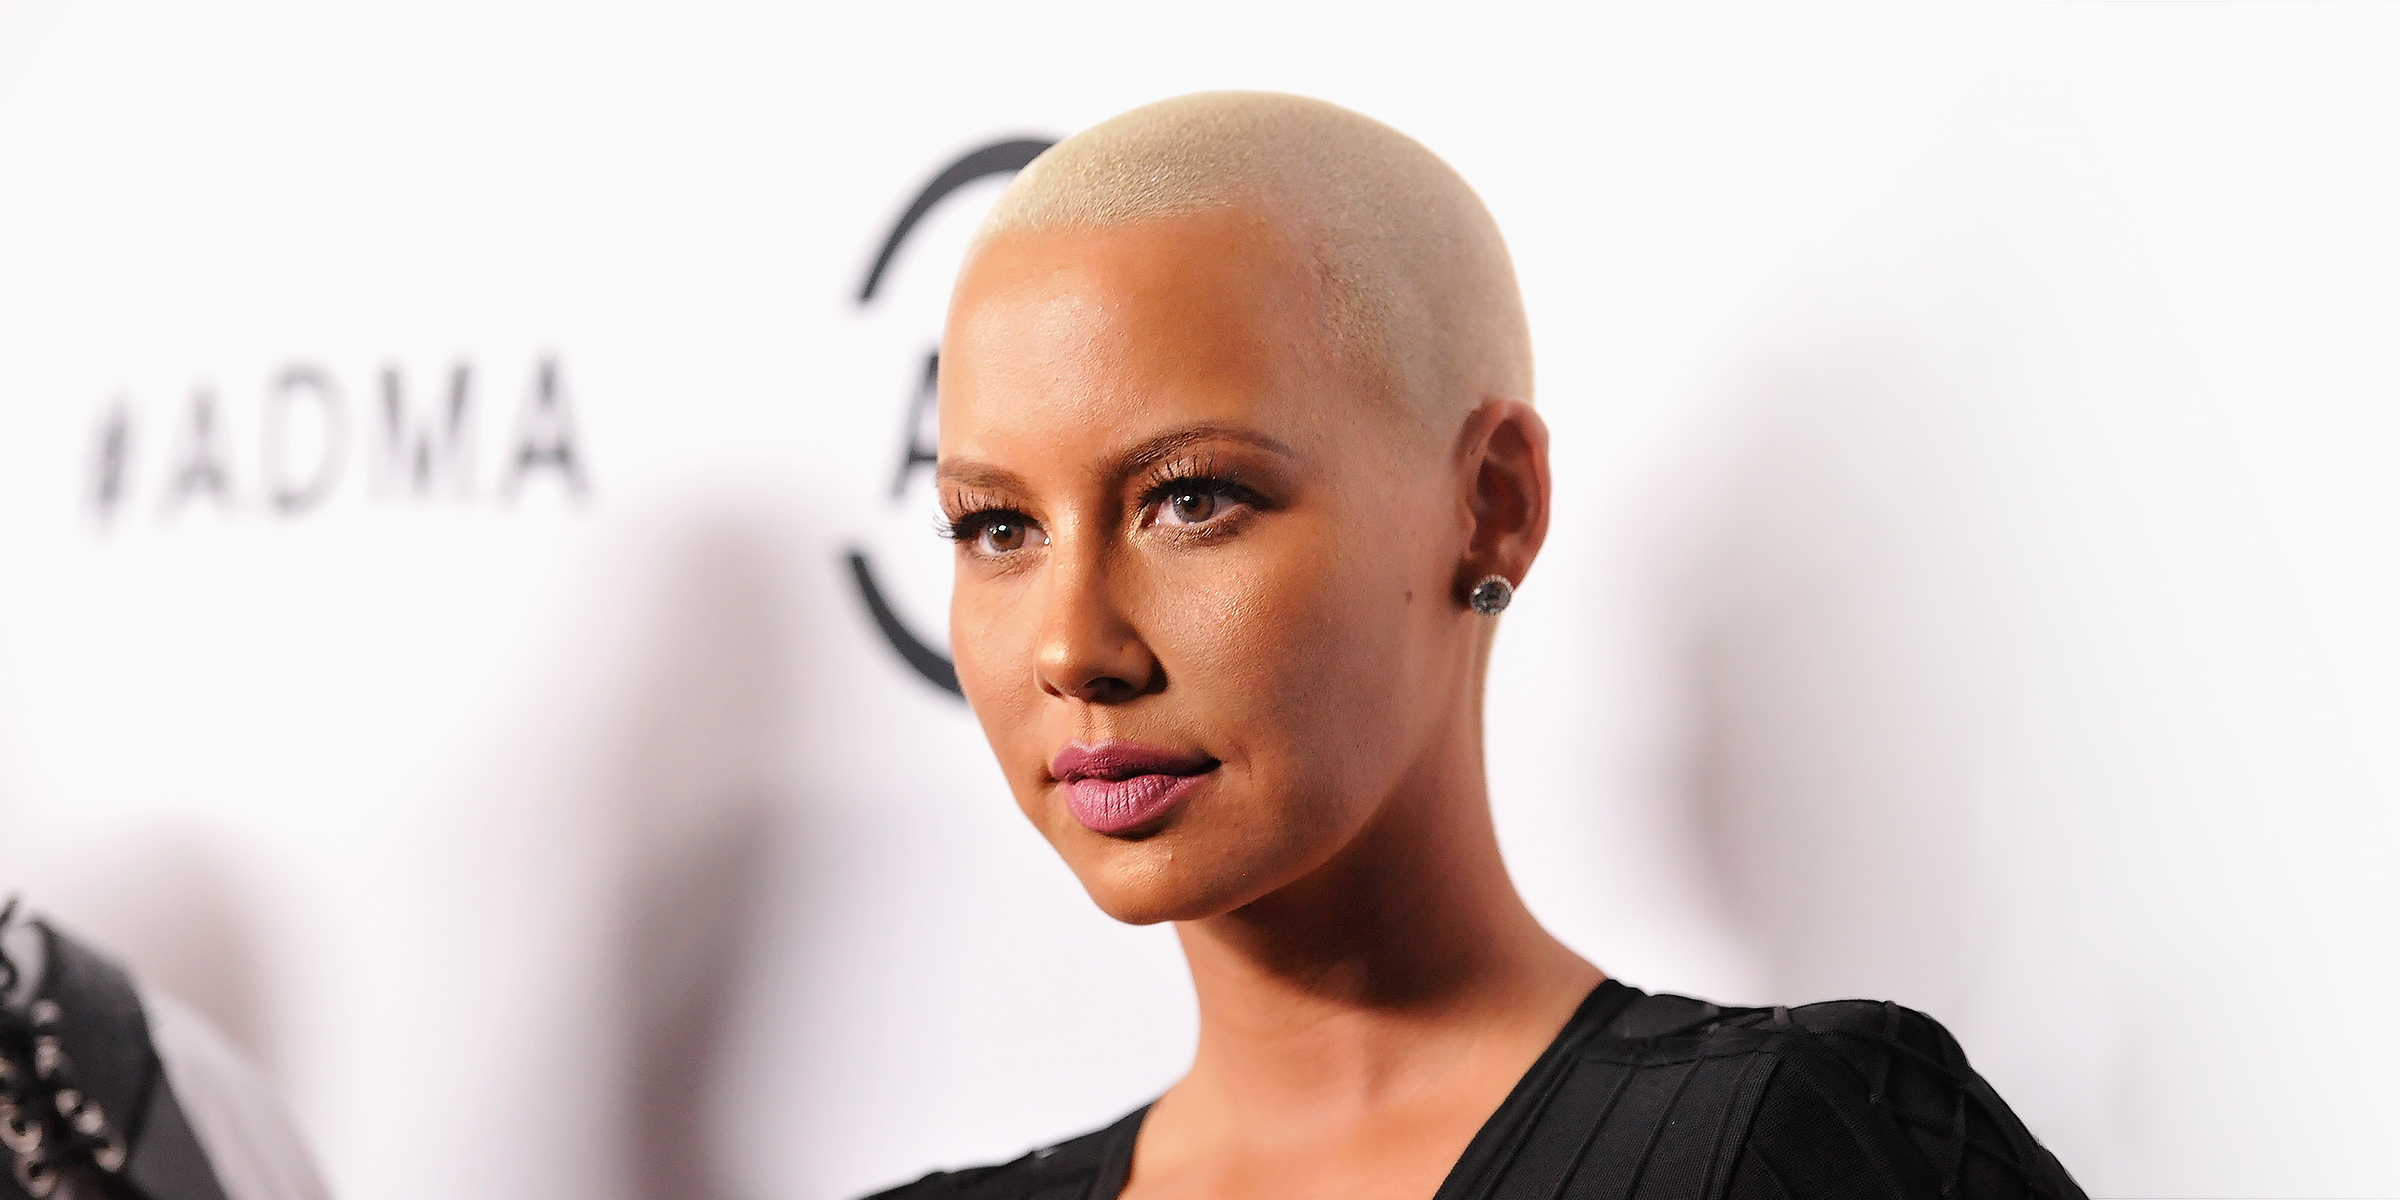 Amber Rose. | Source: Getty Images